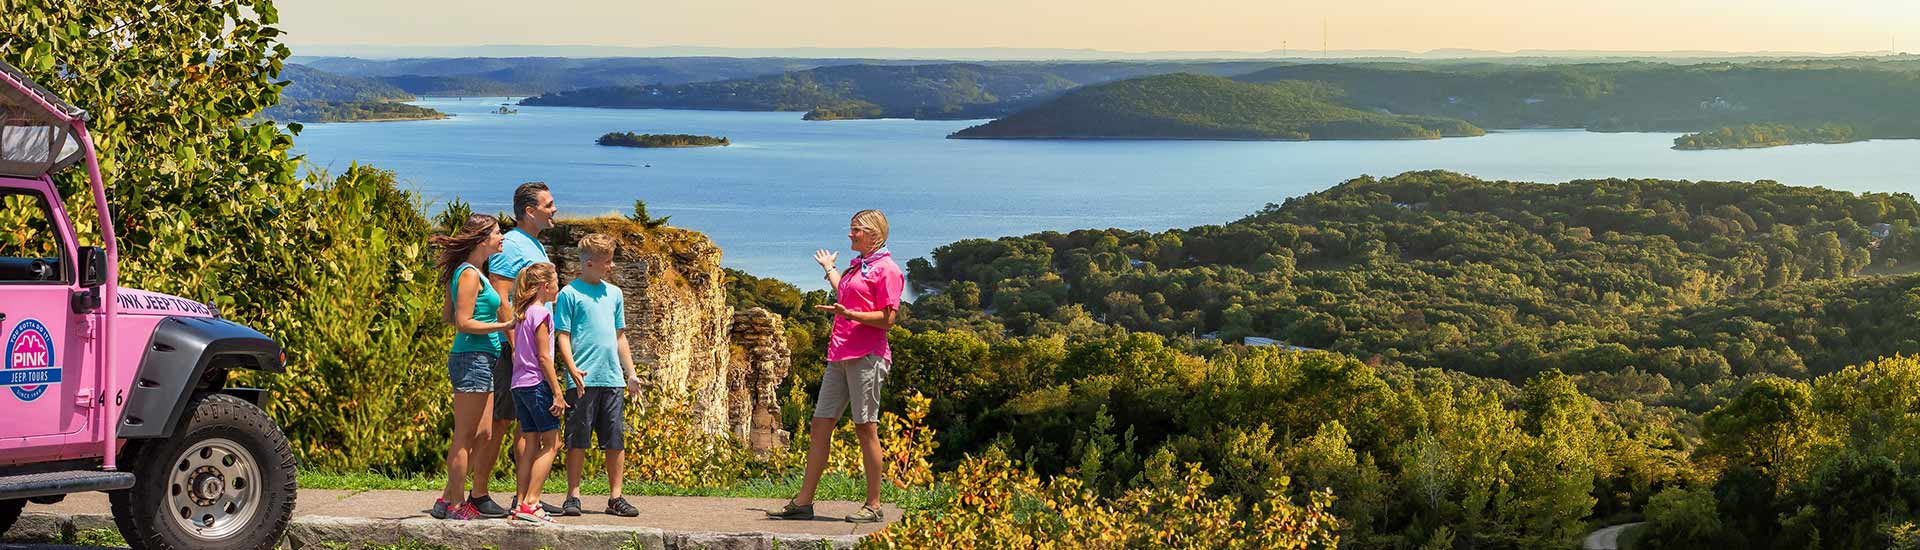 Pink® Jeep® Tour guide and guests atop Baird Mountain overlooking Table Rock Lake with Pink Jeep in foreground.